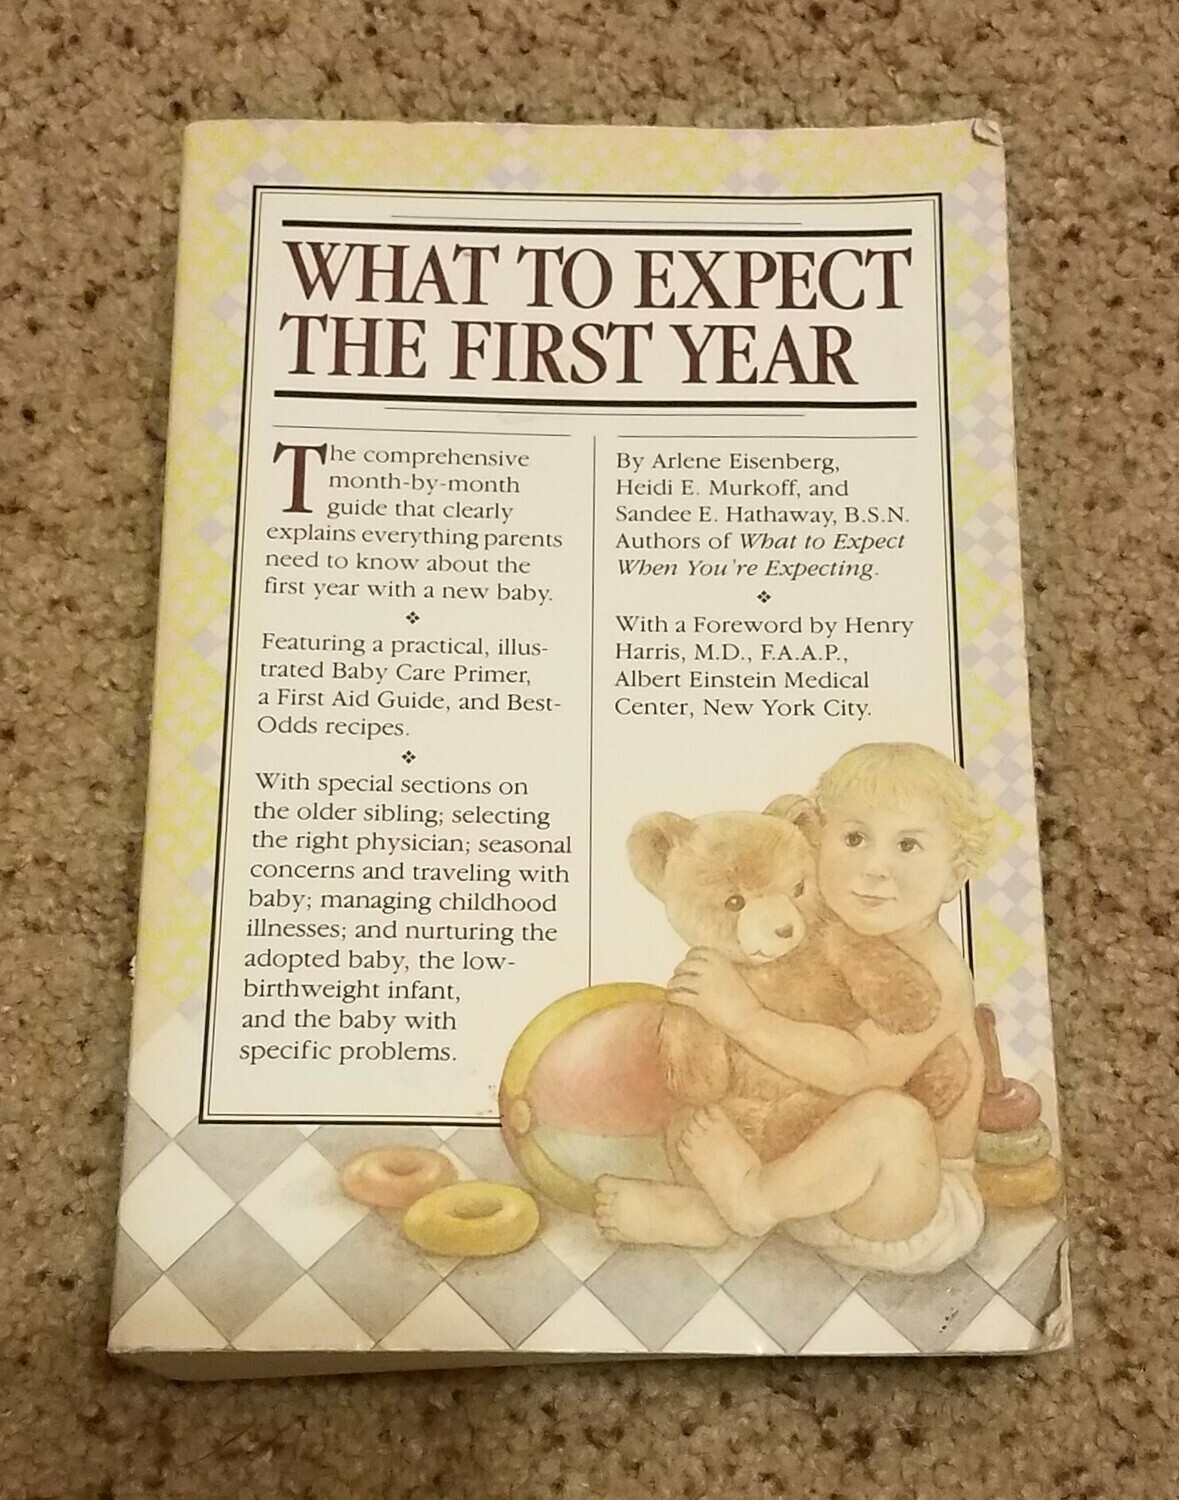 What to Expect the First Year by Henry Harris and Albert Einstein